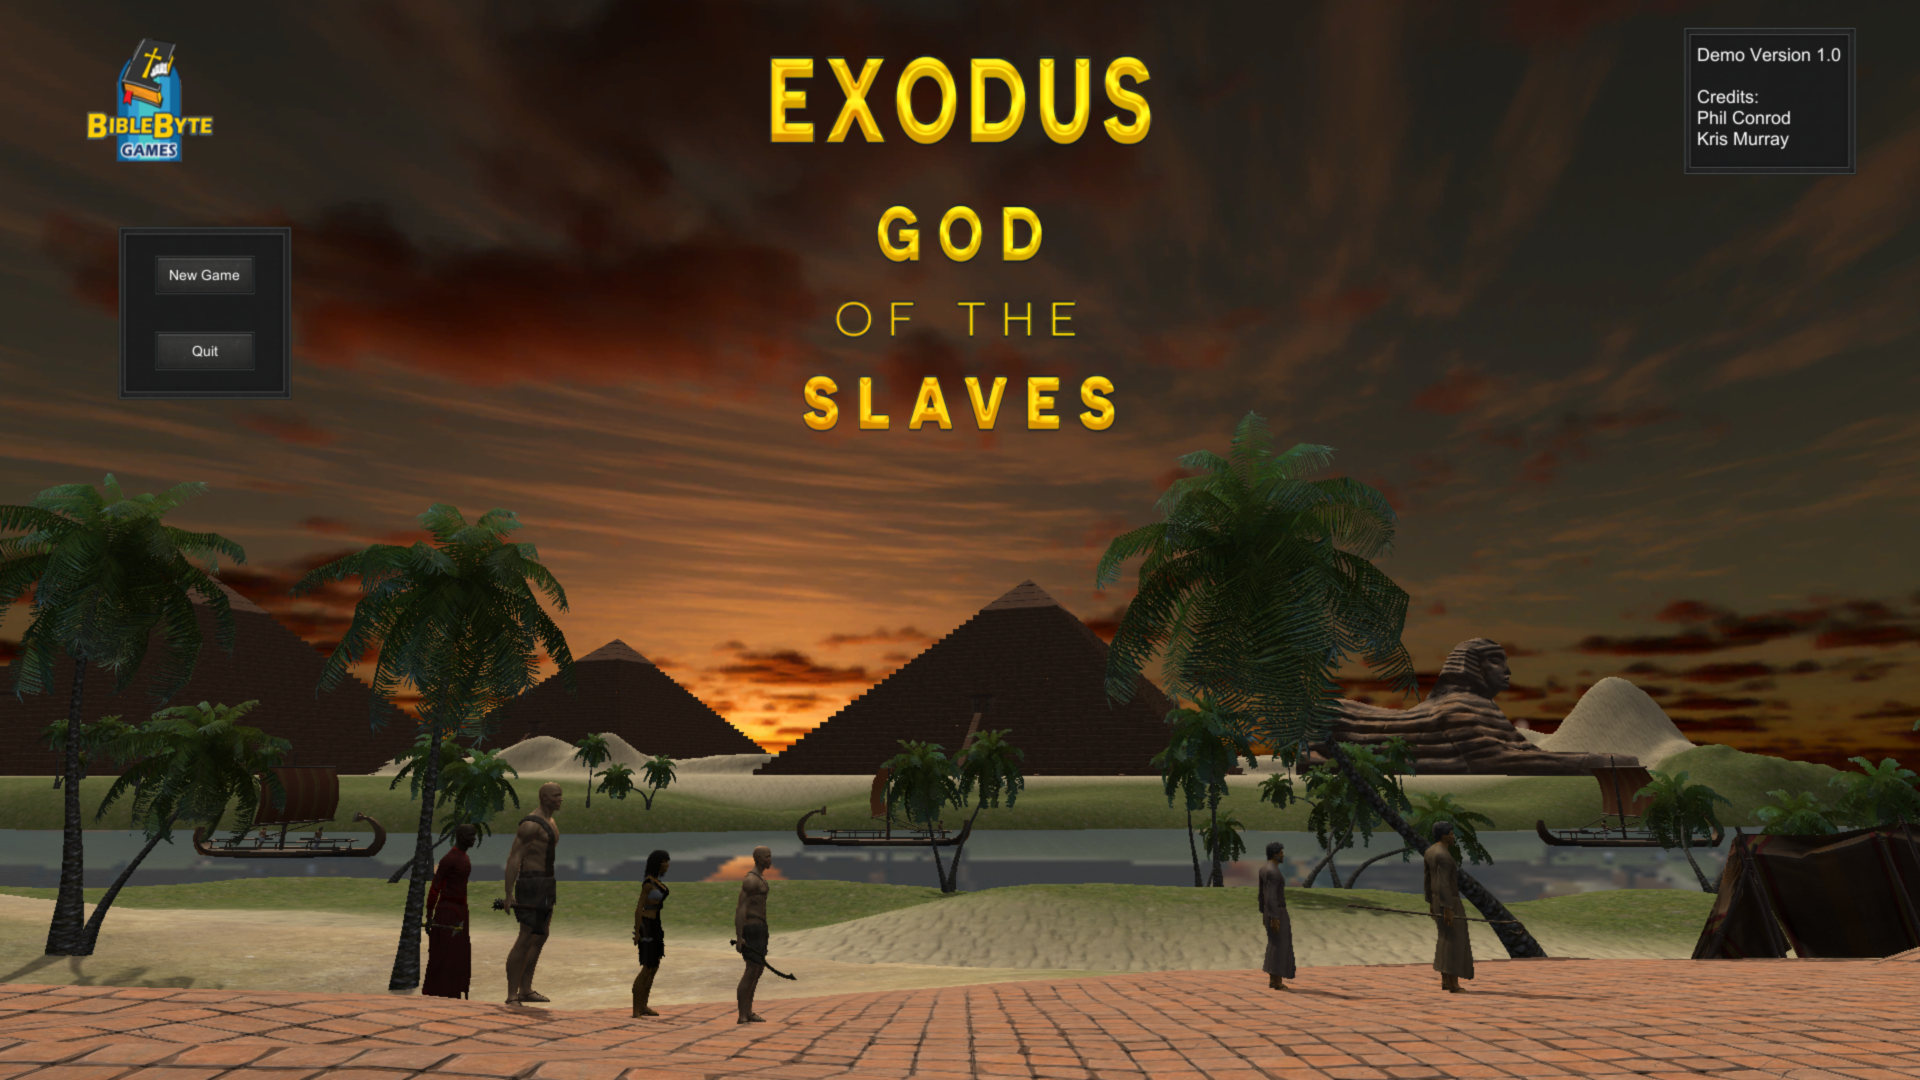 Exodus: God of the Slaves Prototype Vertical Game Slice Demo at the 2017 CGDC